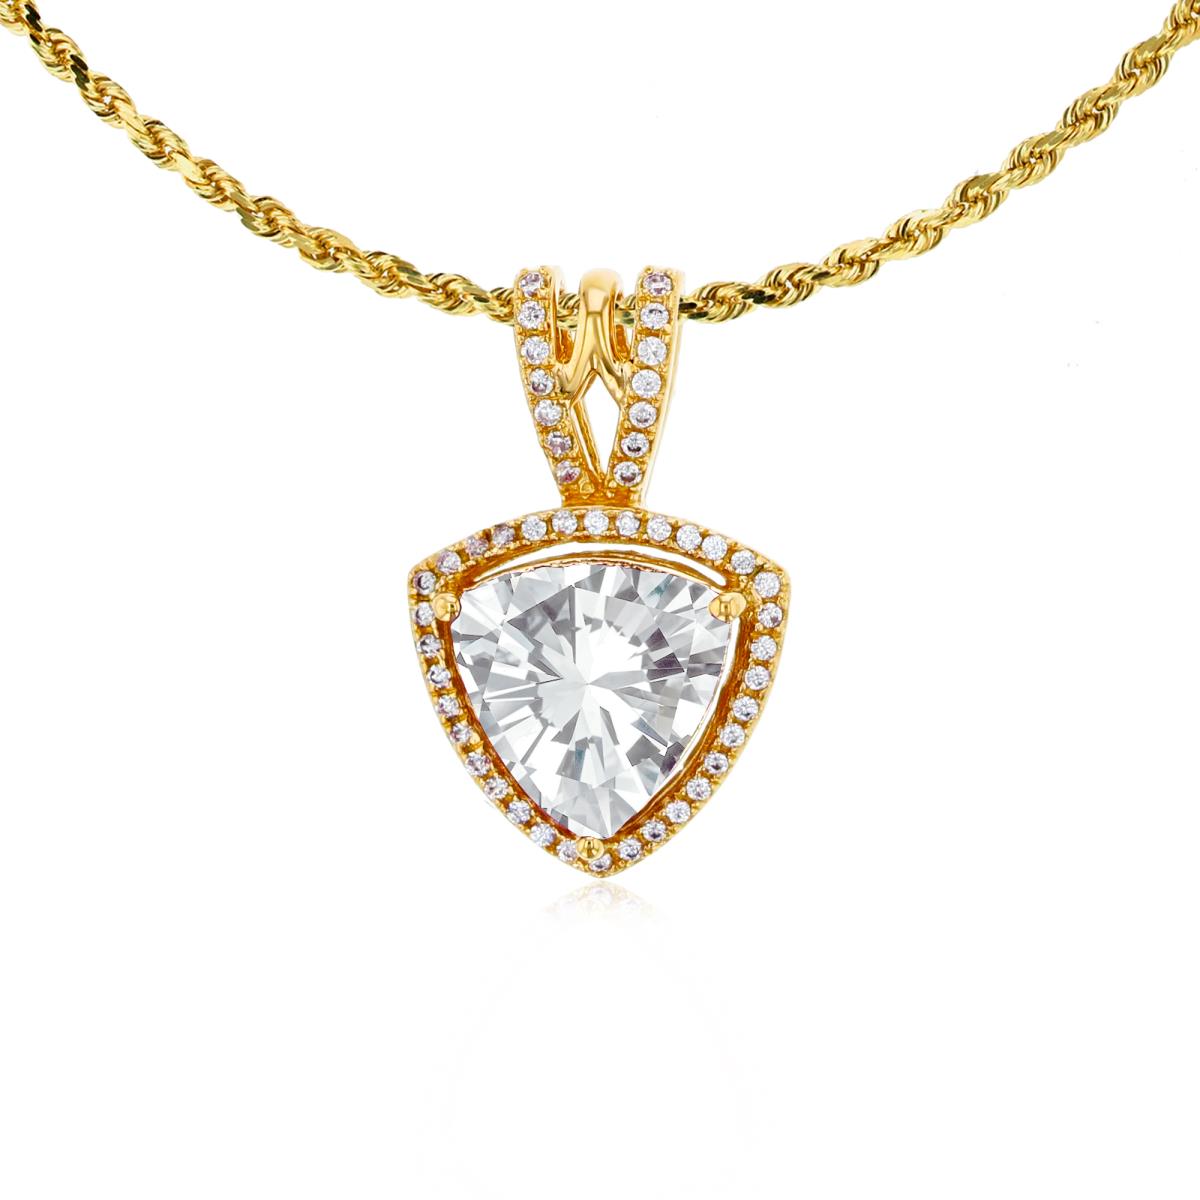 14K Yellow Gold 8mm Trillion White Topaz & 0.13 CTTW Diamonds Frame 18" Rope Chain Necklace